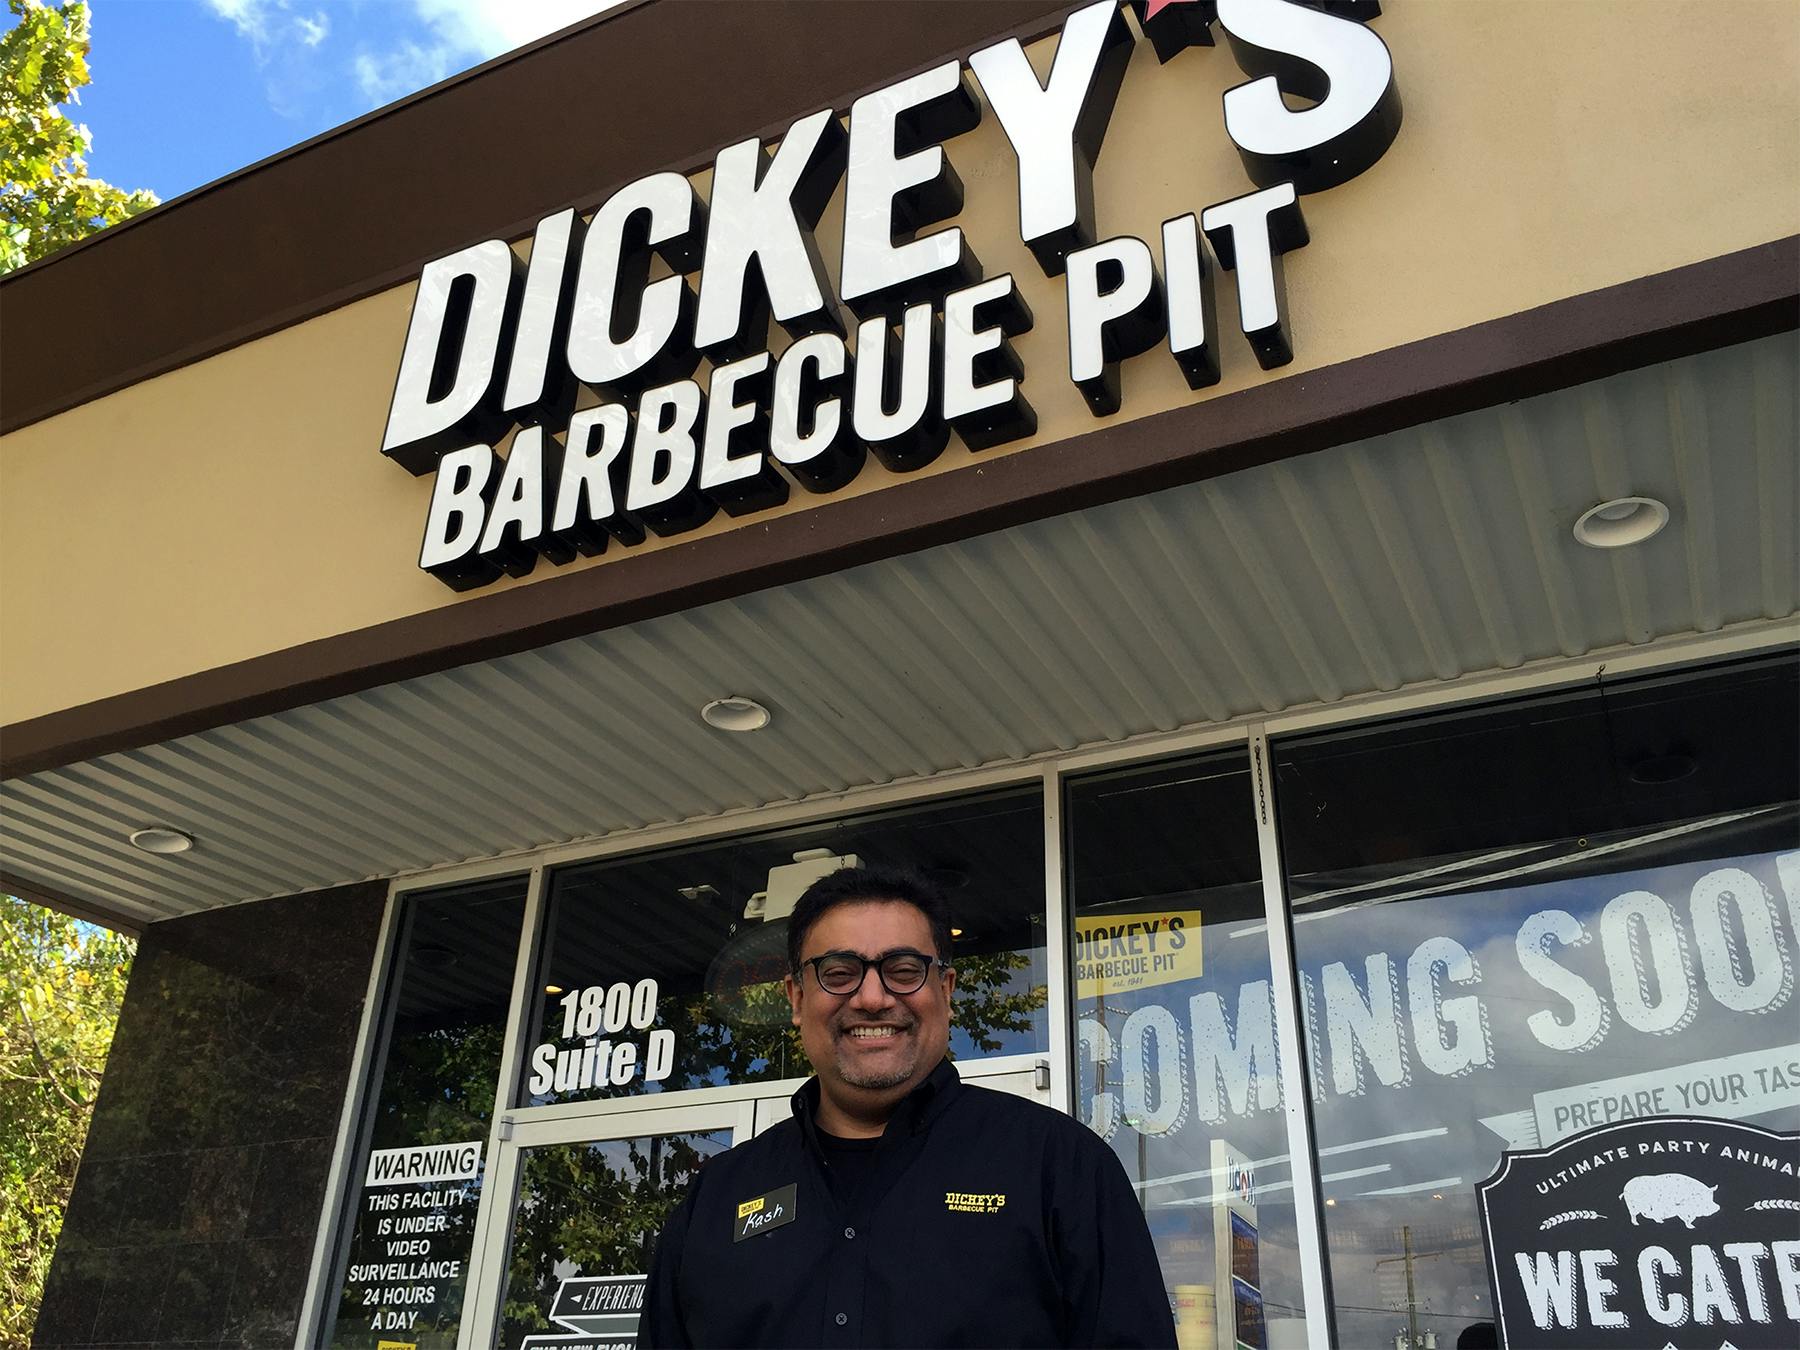  Dickey’s Barbecue Pit Opens Their Doors and Fires Up Their Pit in Kingwood, TX  